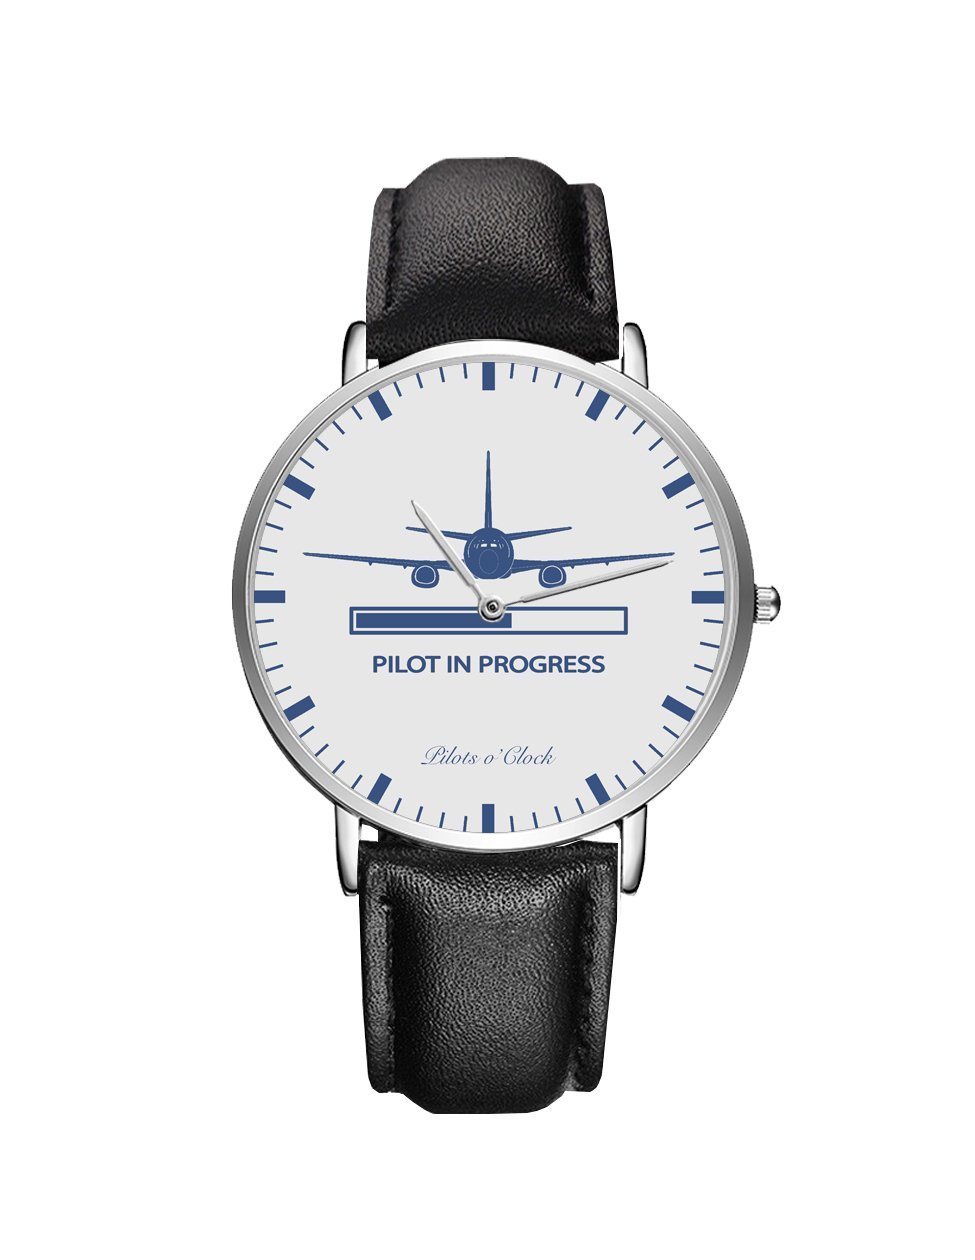 Pilot In Progress Leather Strap Watches Pilot Eyes Store Silver & Black Leather Strap 